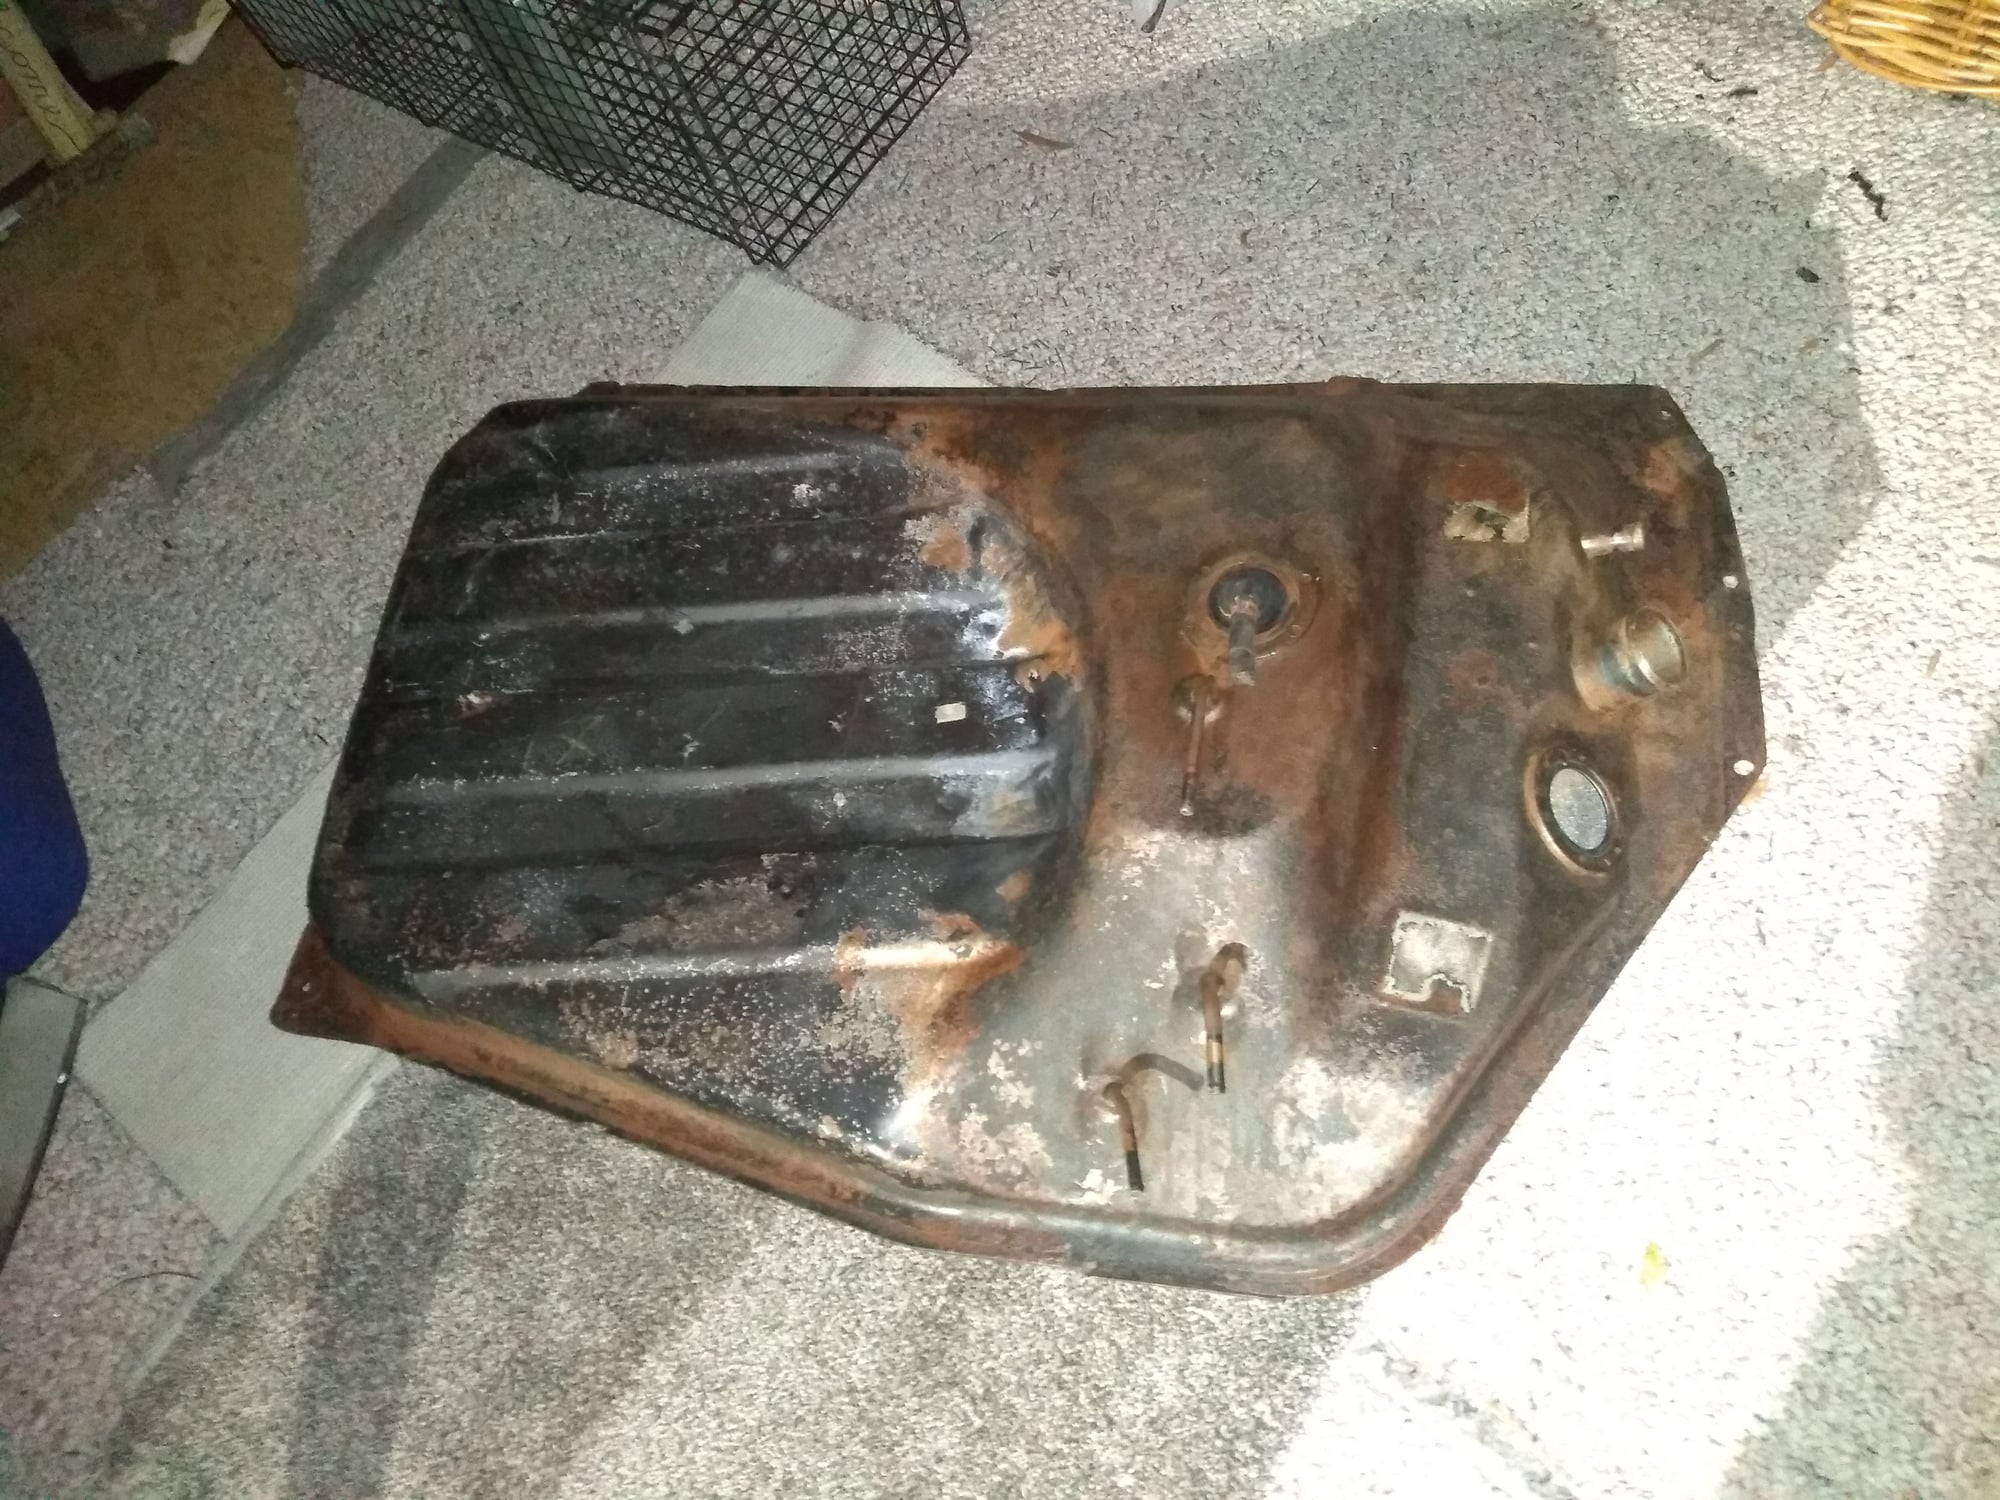 Engine - Intake/Fuel - Gas Tank for 82. In Ontario Canada. - Used - 1981 to 1985 Mazda RX-7 - Stratford, ON N0B2P0, Canada